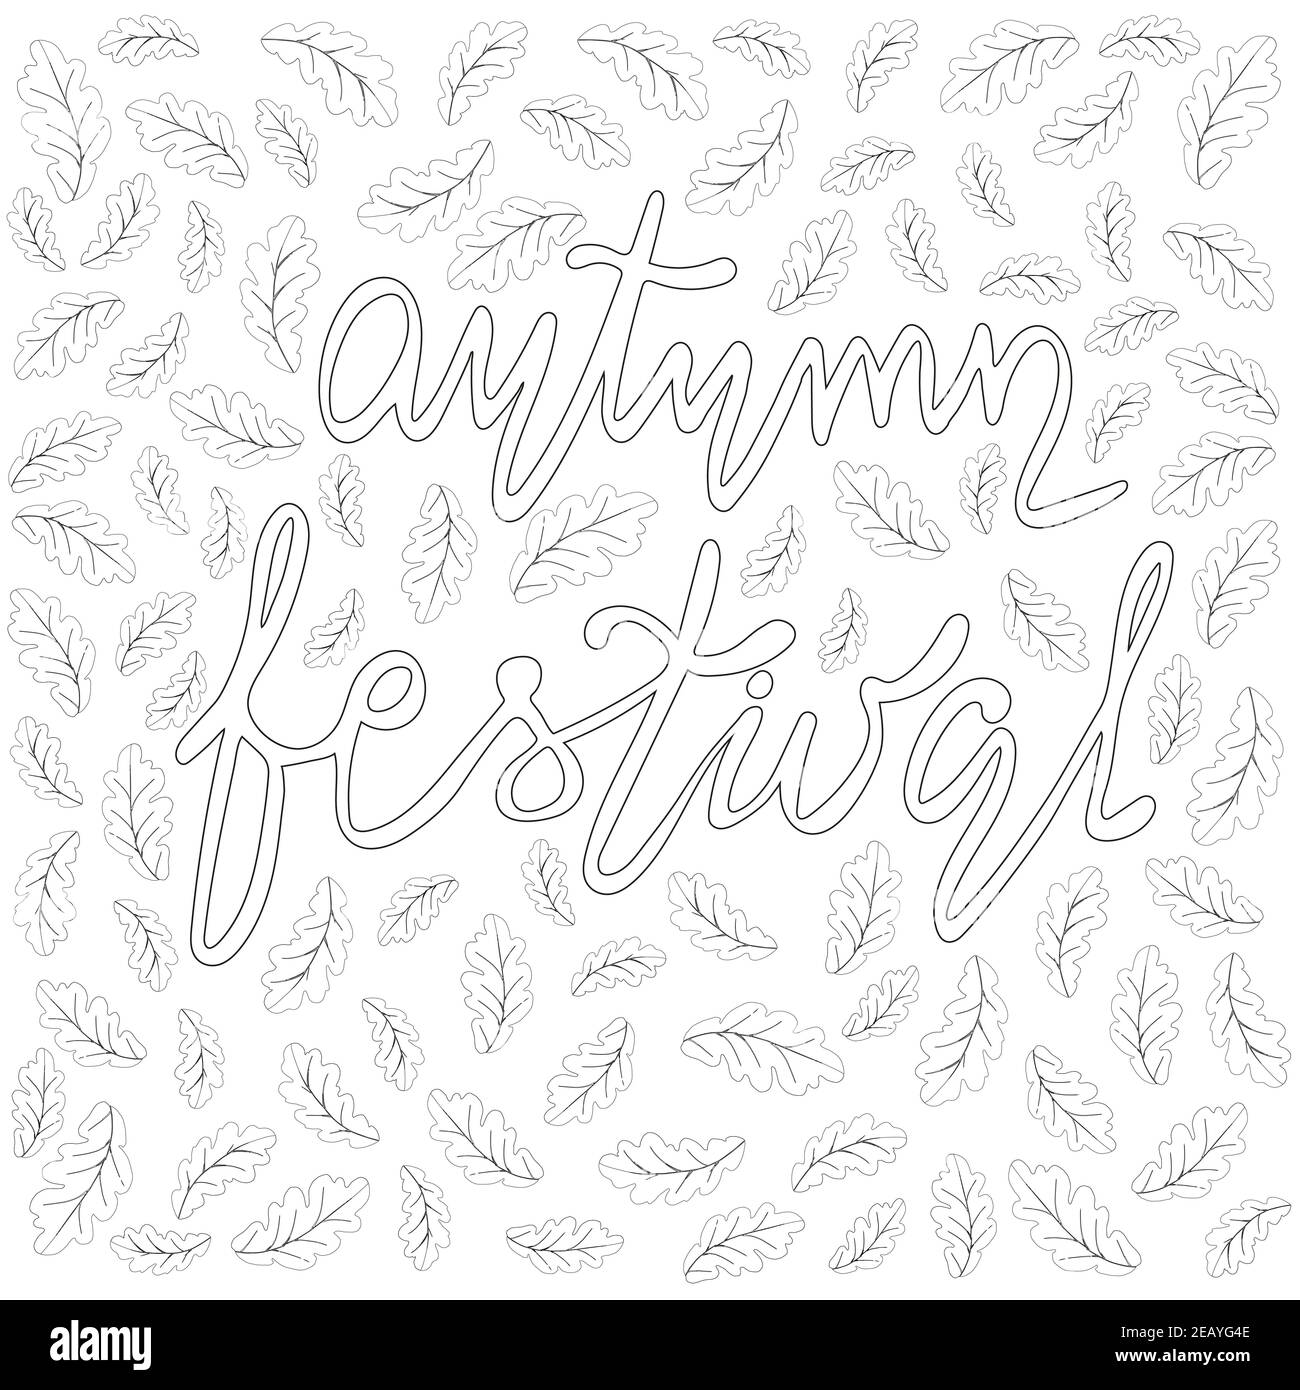 Botanical coloring book page with oak leaf element Stock Vector